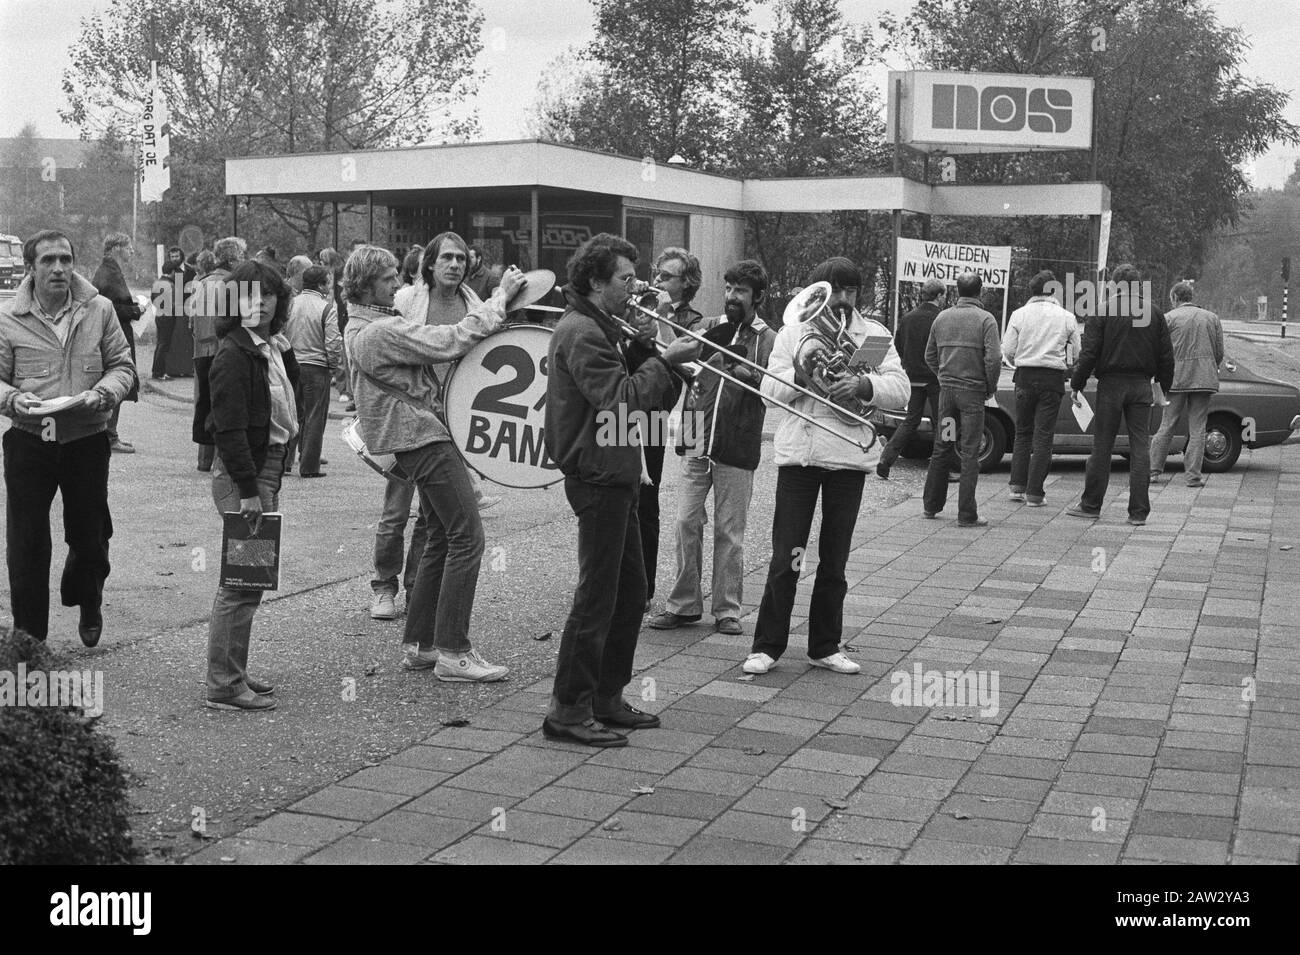 Strike at the NOS in Hilversum Mailing broadcasting staff Make music for the entrance of the NOS in Hilversum Date: October 16, 1981 Location: Hilversum, Noord-Hol, country Keywords: Action, broadcasting staff, Strikes, gateway Institution Name: NOS Foto Stock